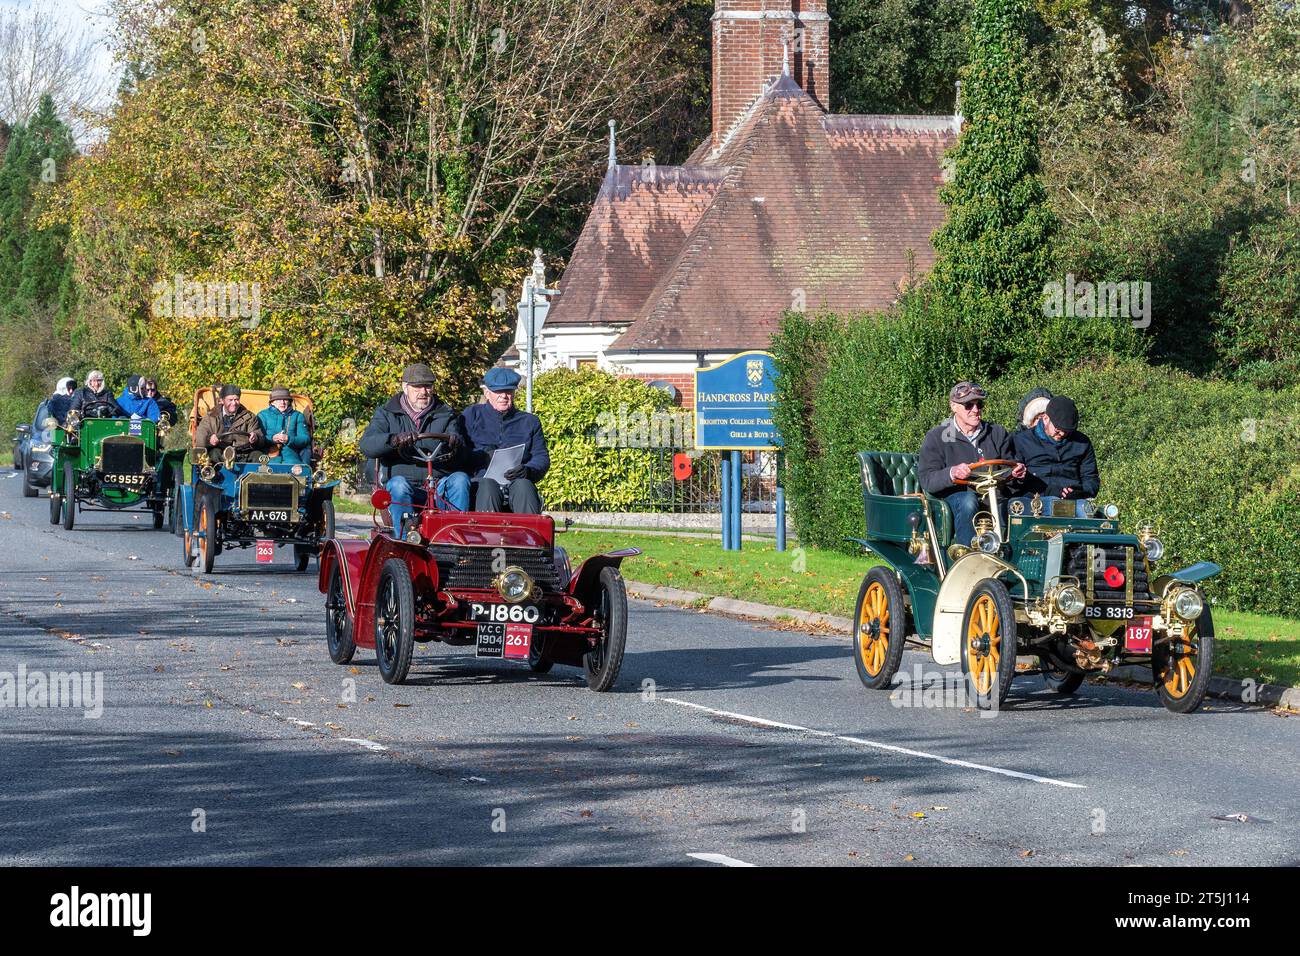 5th November 2023. Participants in the London to Brighton Veteran Car Run 2023 driving through West Sussex, England, UK. The route of the popular annual event runs for 60 miles. Pictured: four vintage cars on the road in Handcross. Stock Photo